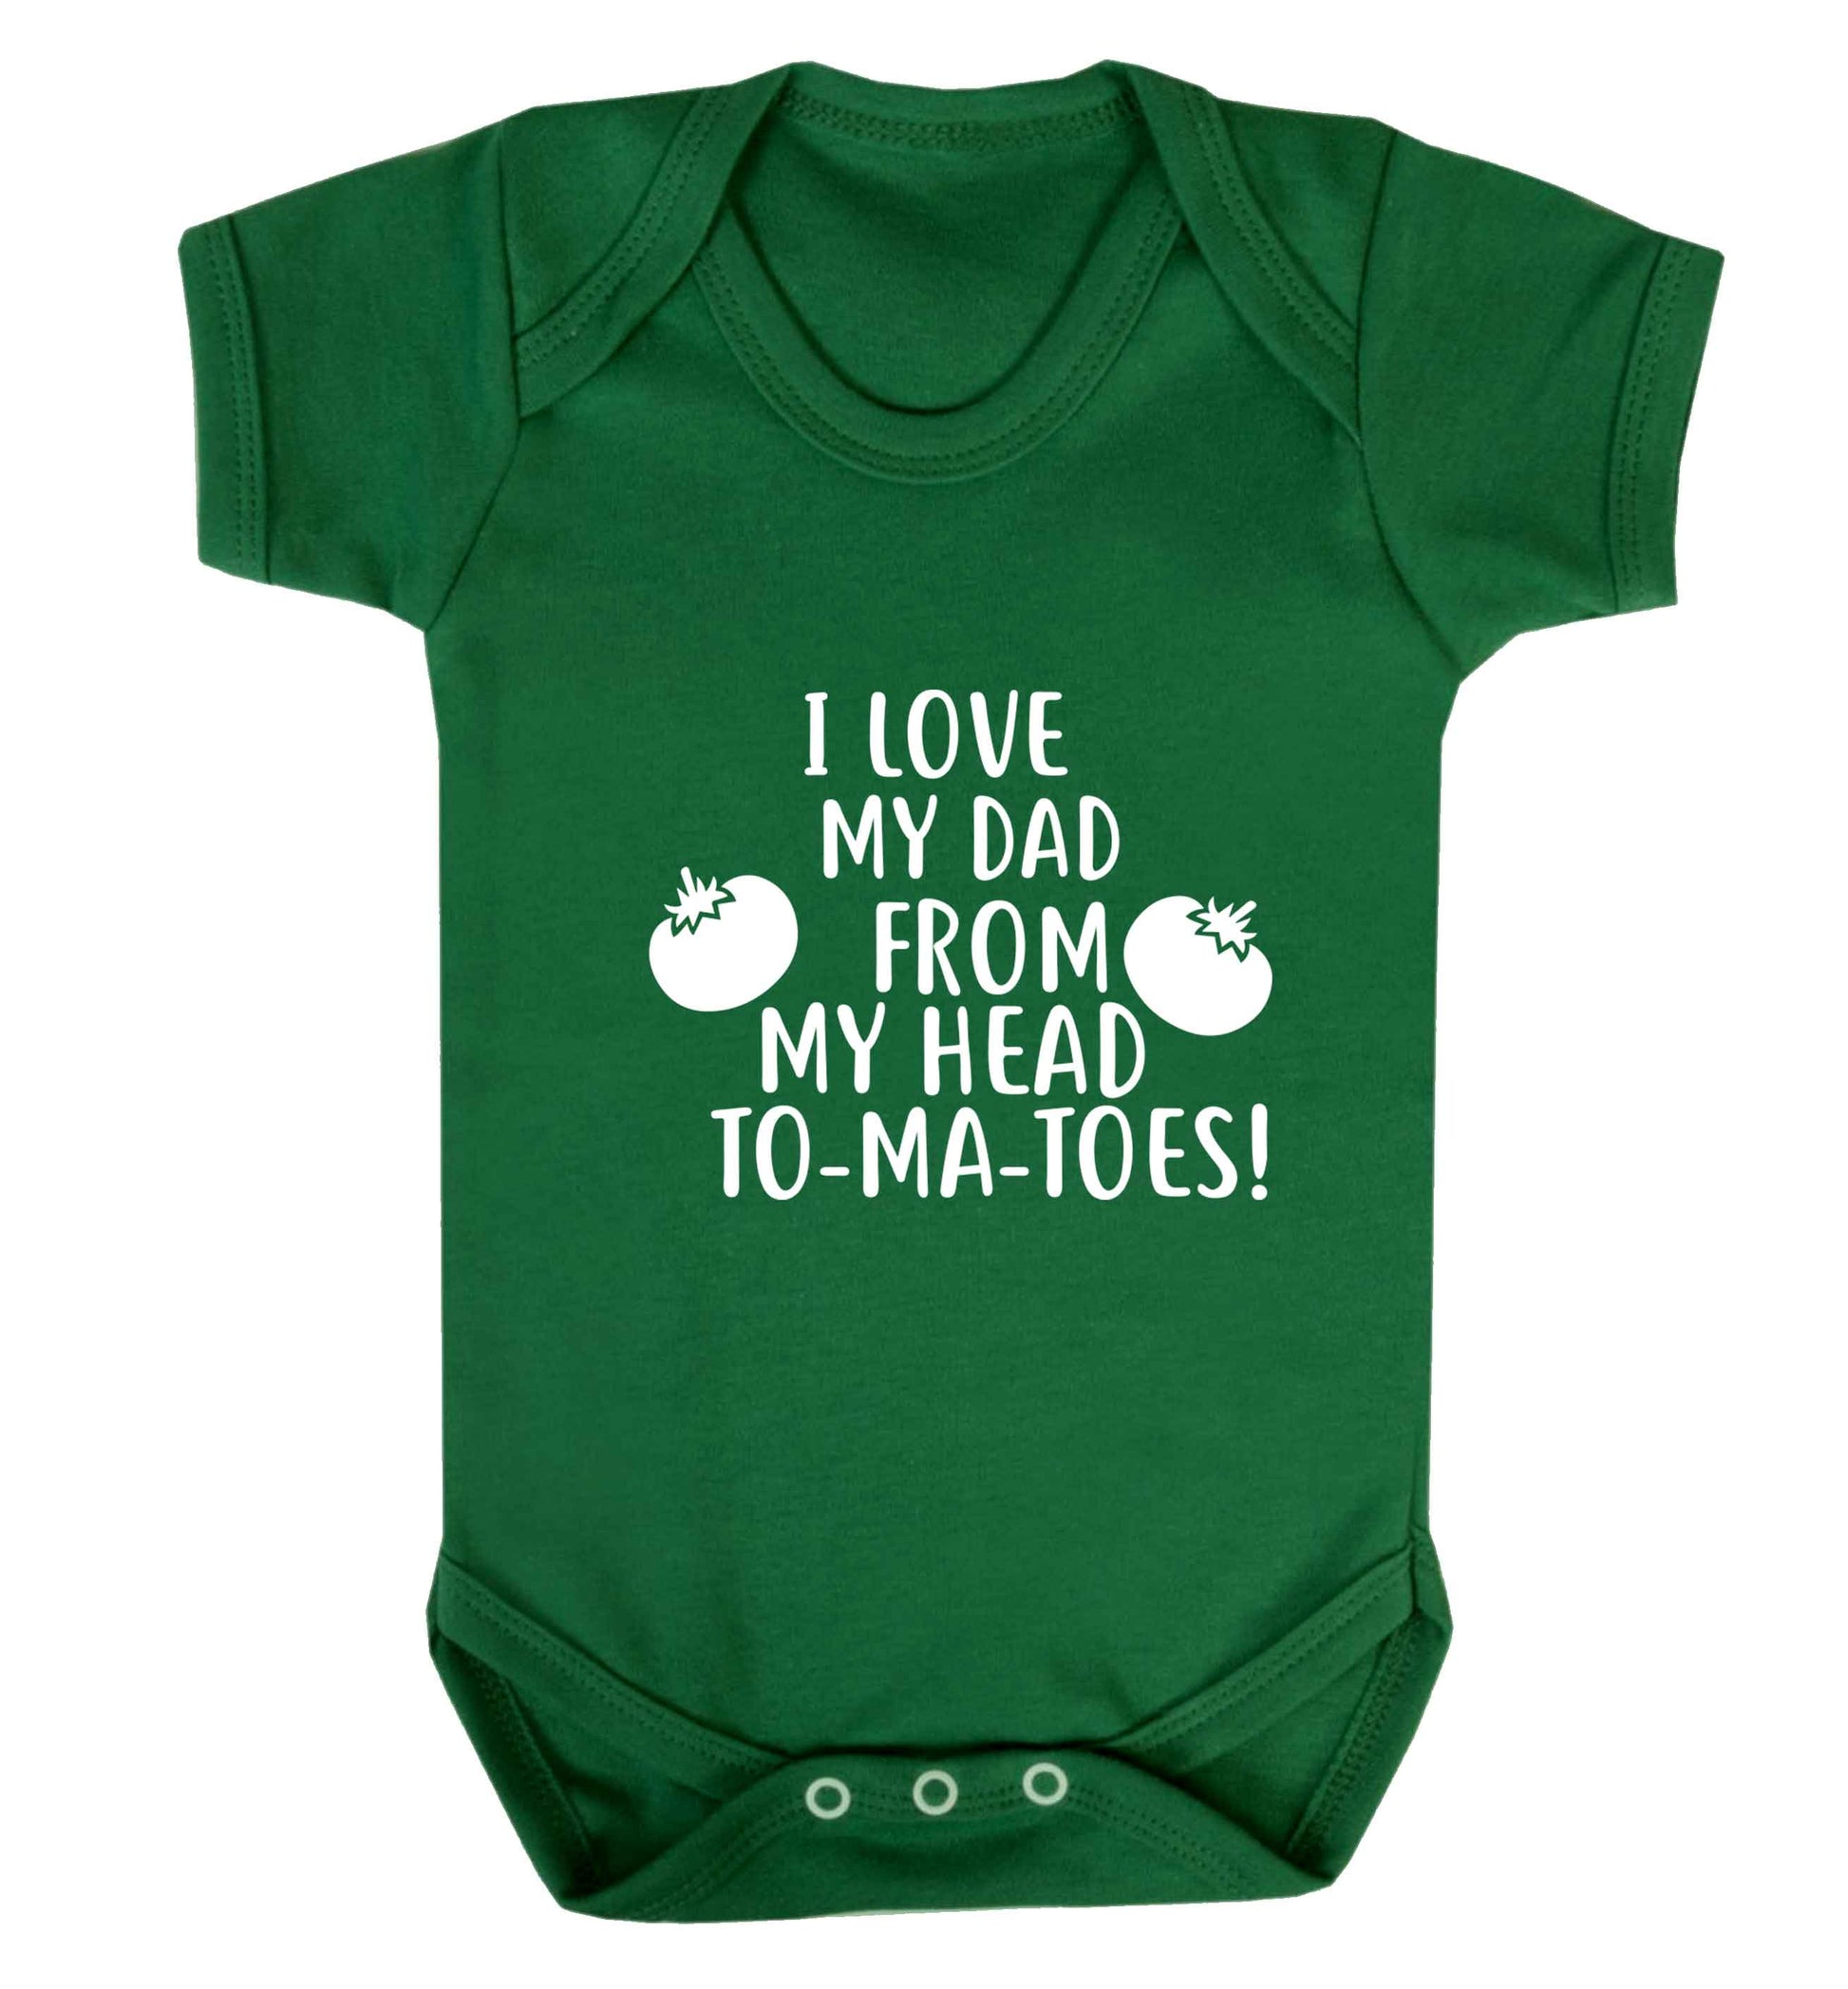 I love my dad from my head to-ma-toes baby vest green 18-24 months